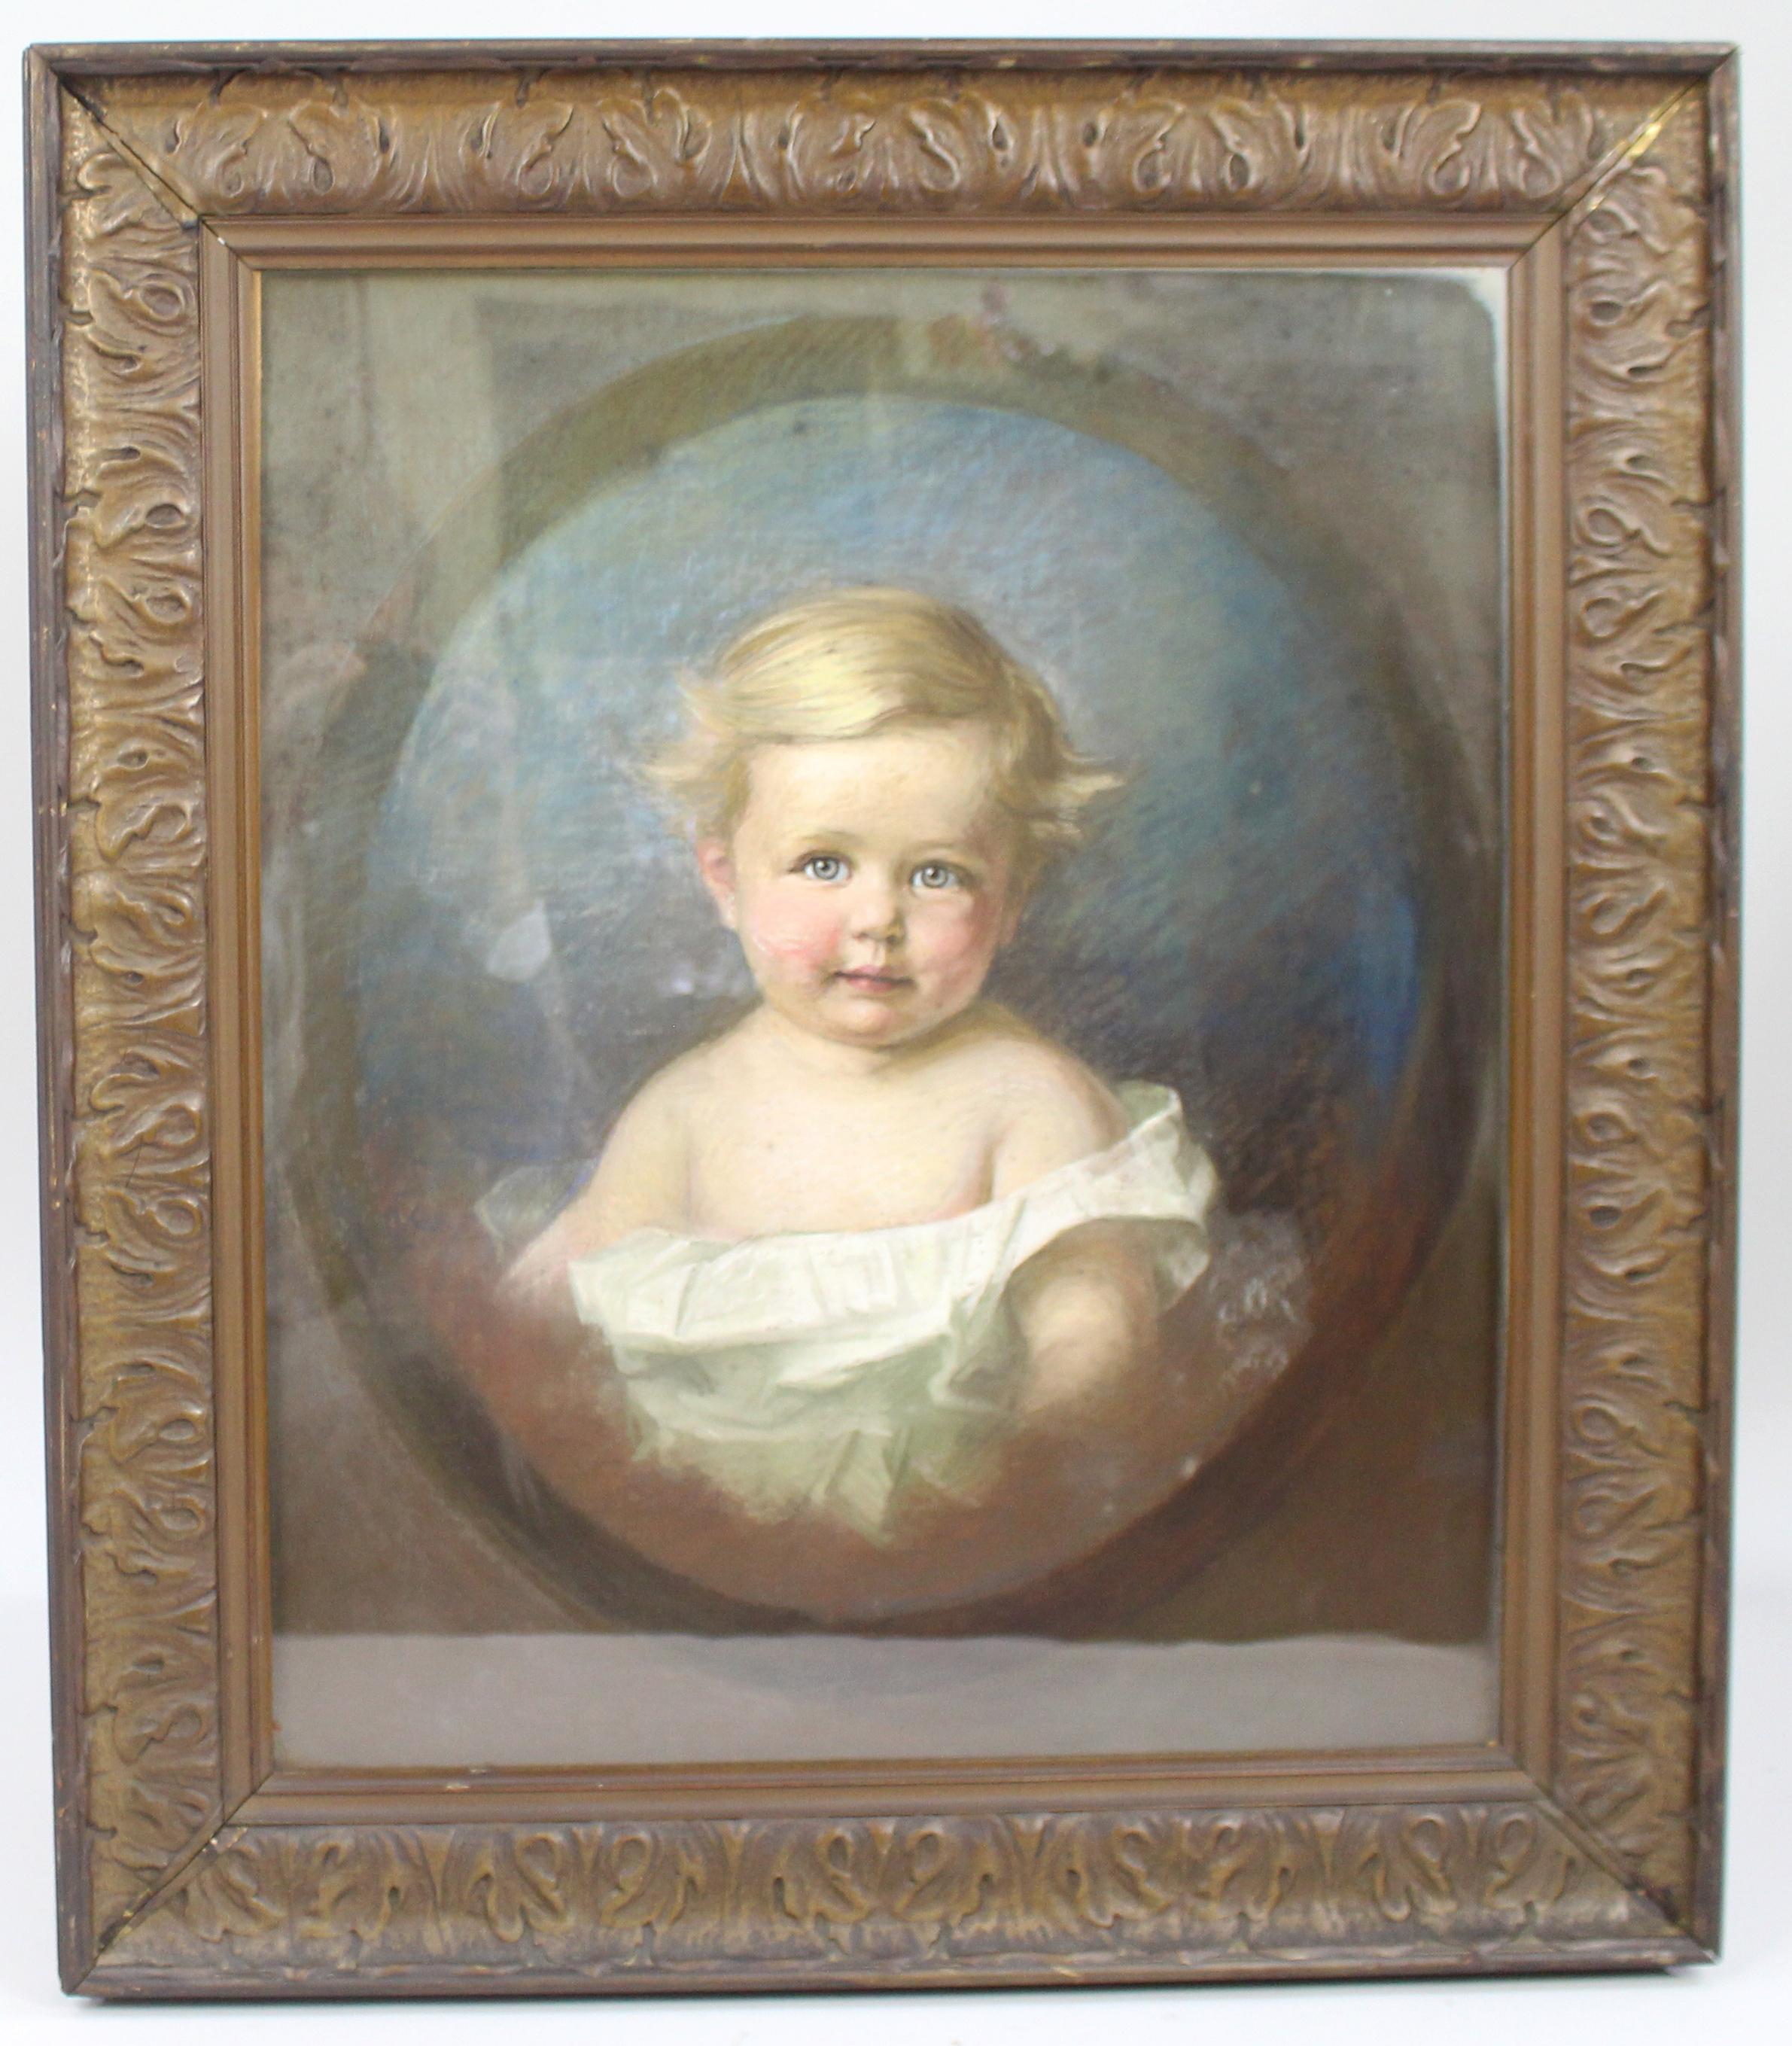 
 
Period 
Early 20th c.

Artist 
Emily Eyres (British), both pictures framed and dated by the artist

Medium 
Pastel

Size 
Both frames measure 69 x 79 cm / 27 x 31 in

Frame 
Set in original heavy bronzed gilt frames

Condition